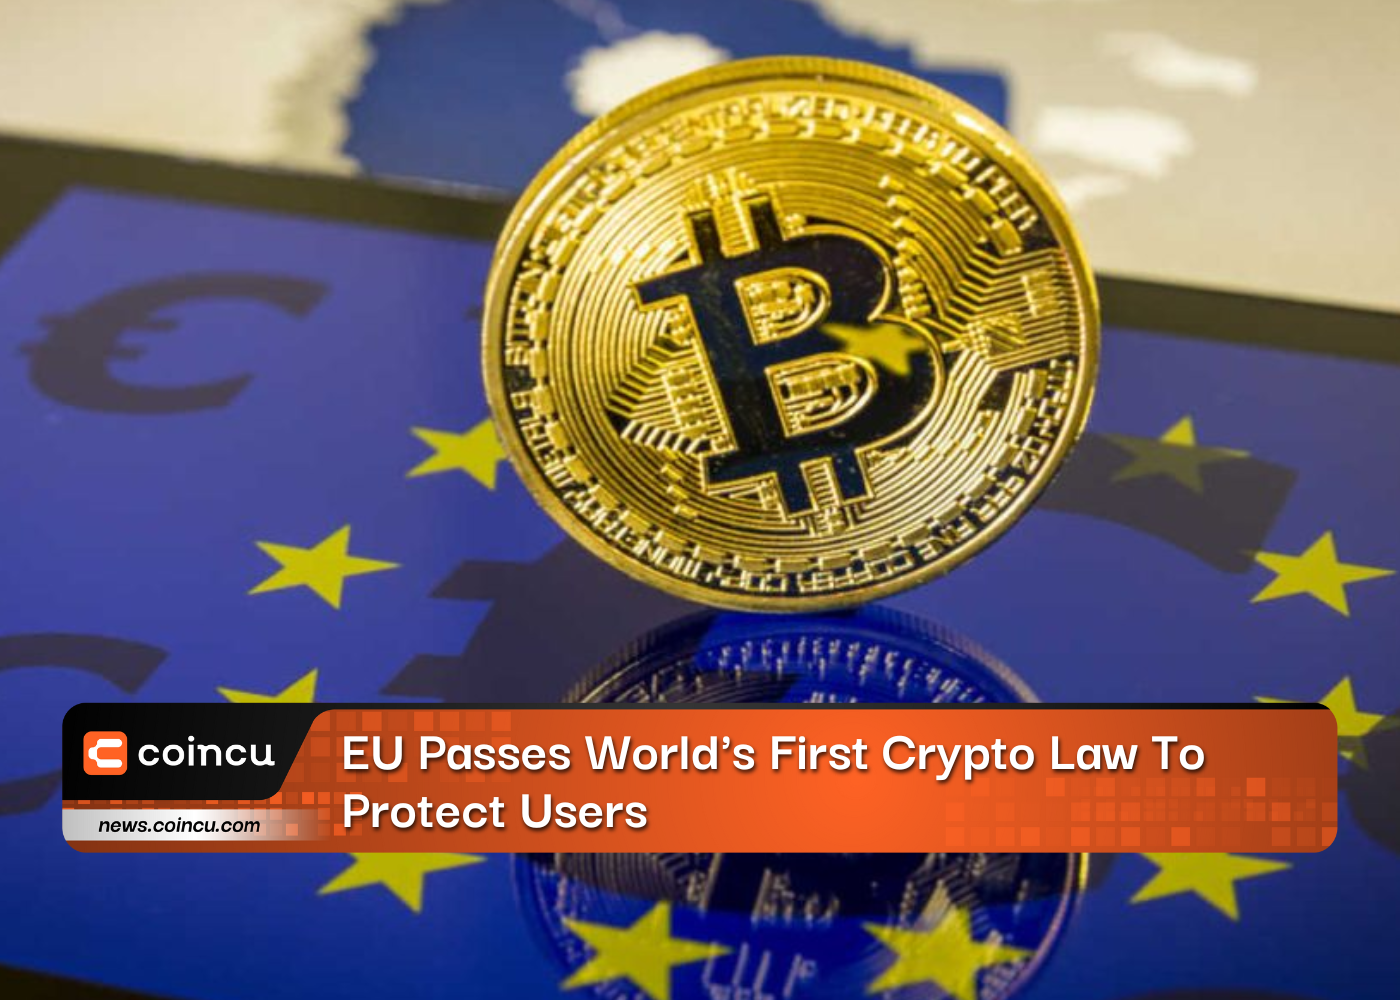 EU Passes World's First Crypto Law To Protect Users